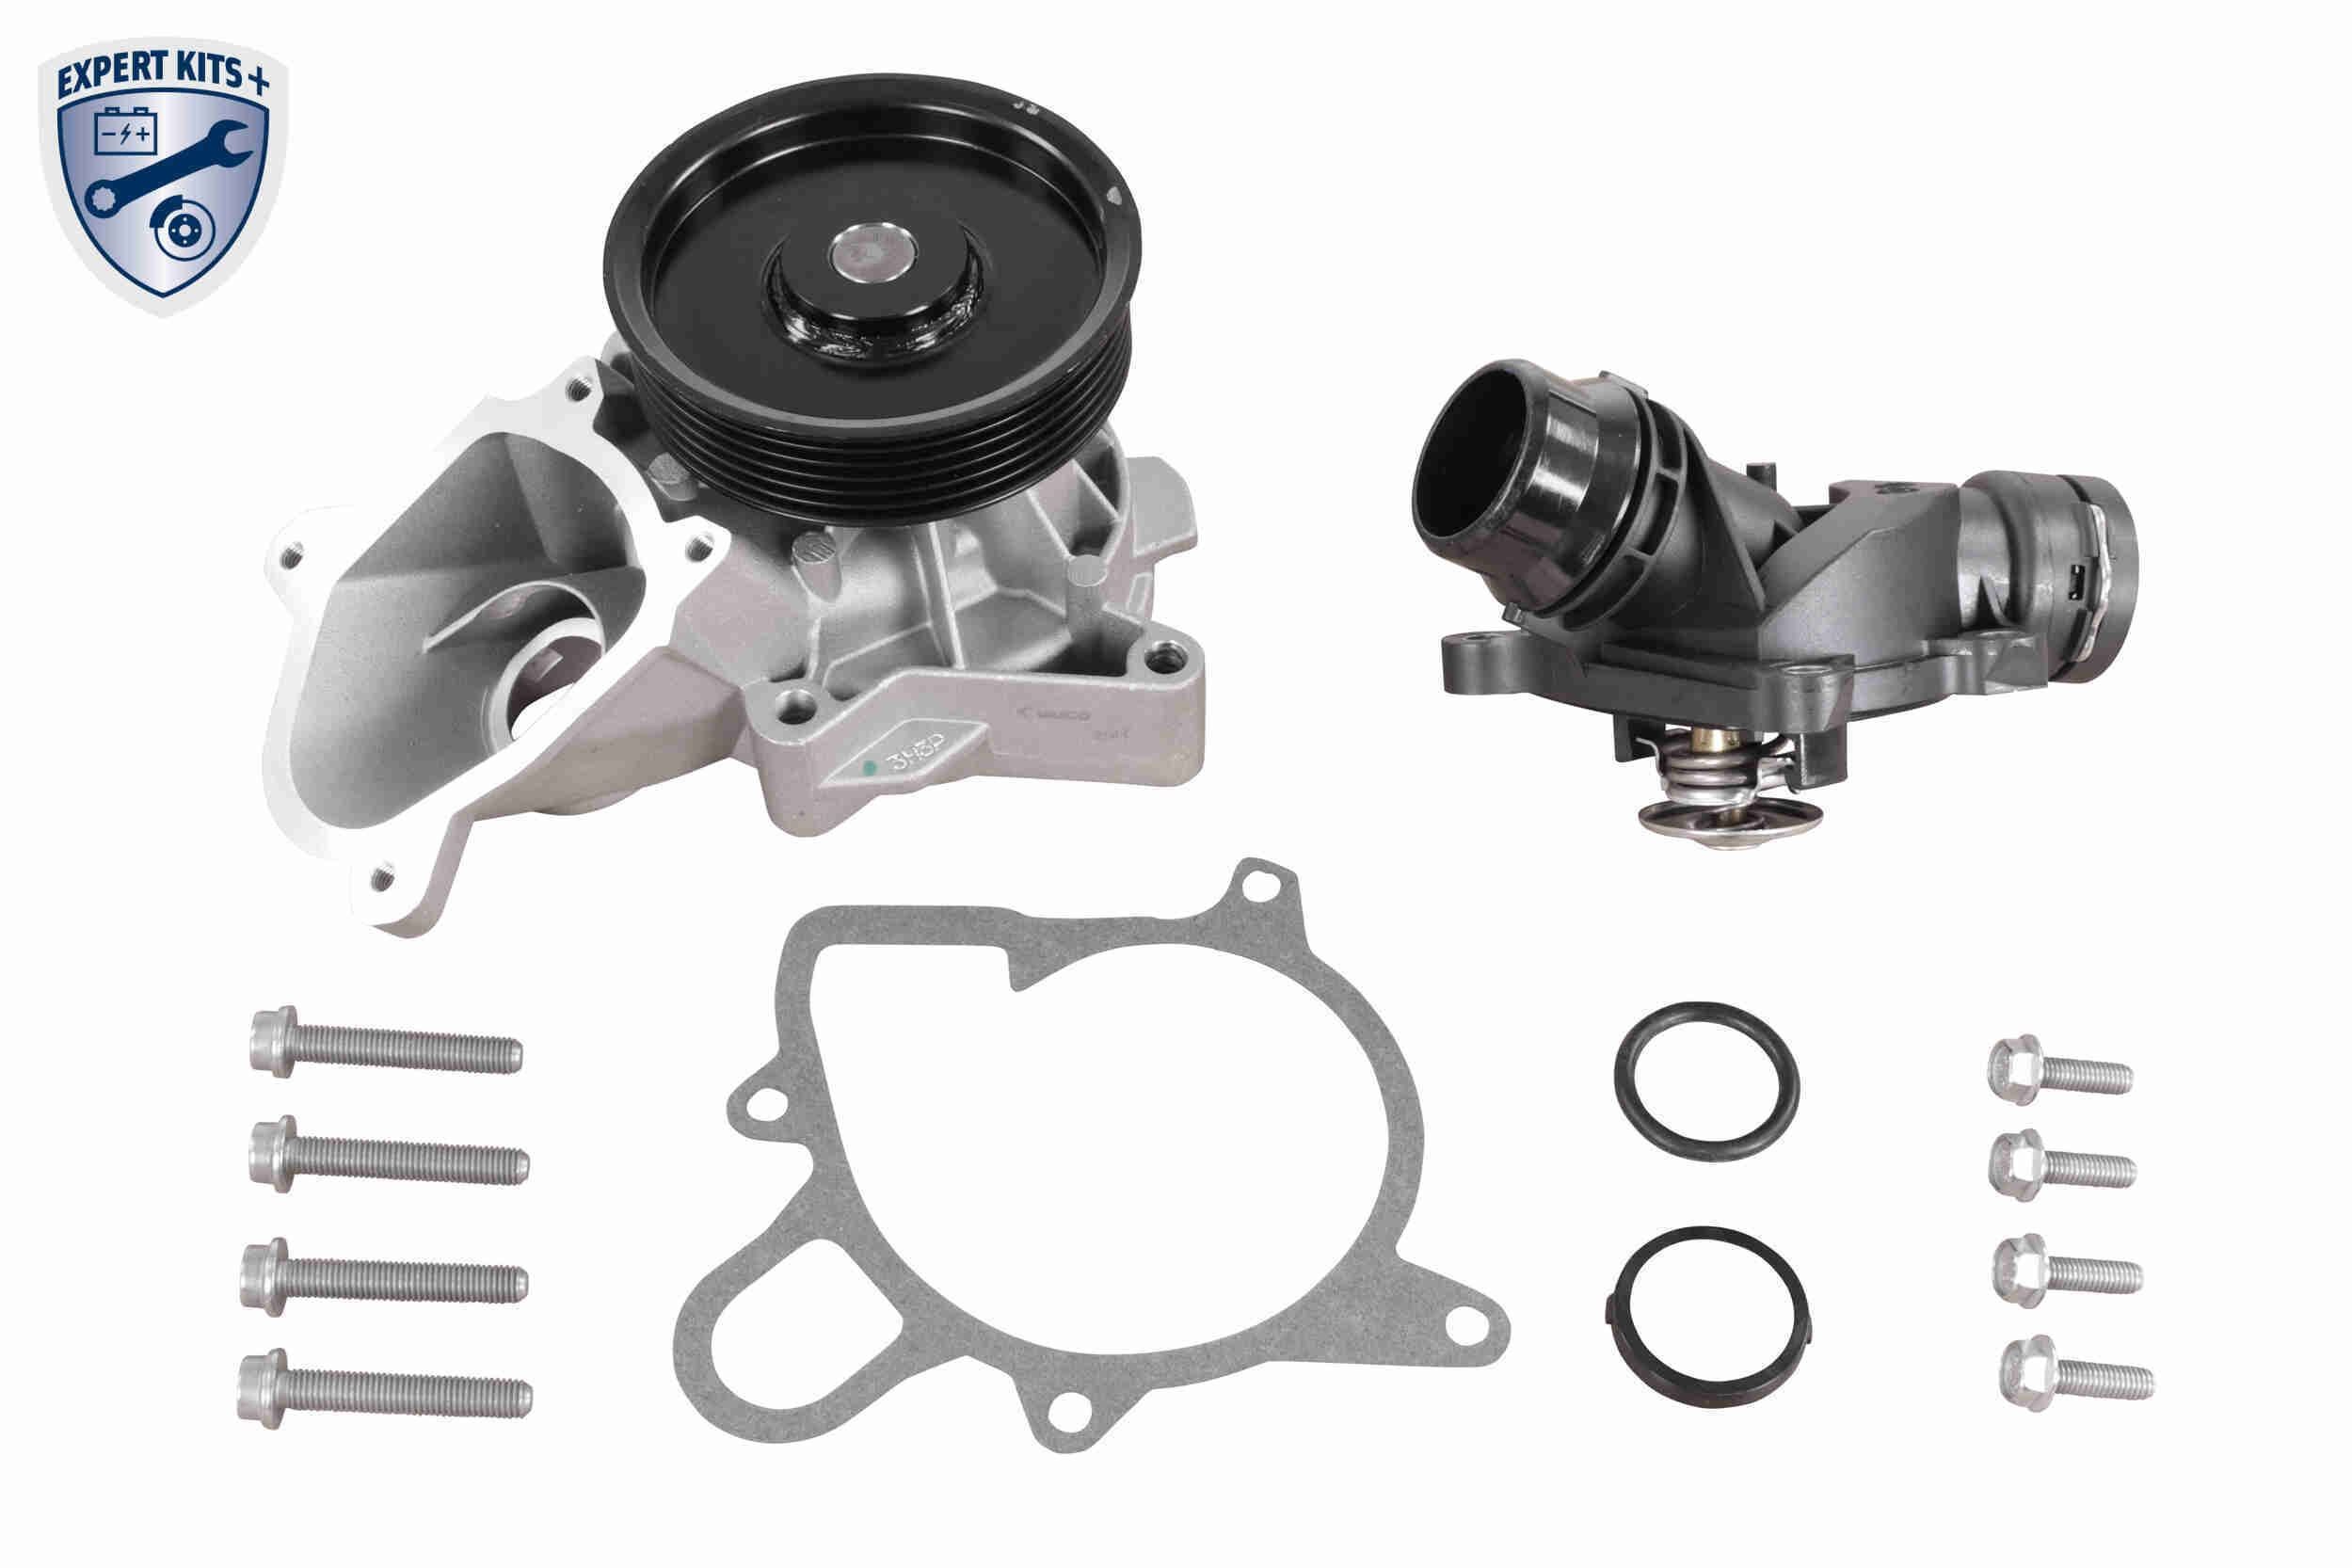 VEMO V20-99-2101 Thermostat Housing Engine Block, with gaskets/seals, with bolts/screws, with sensor, with thermostat